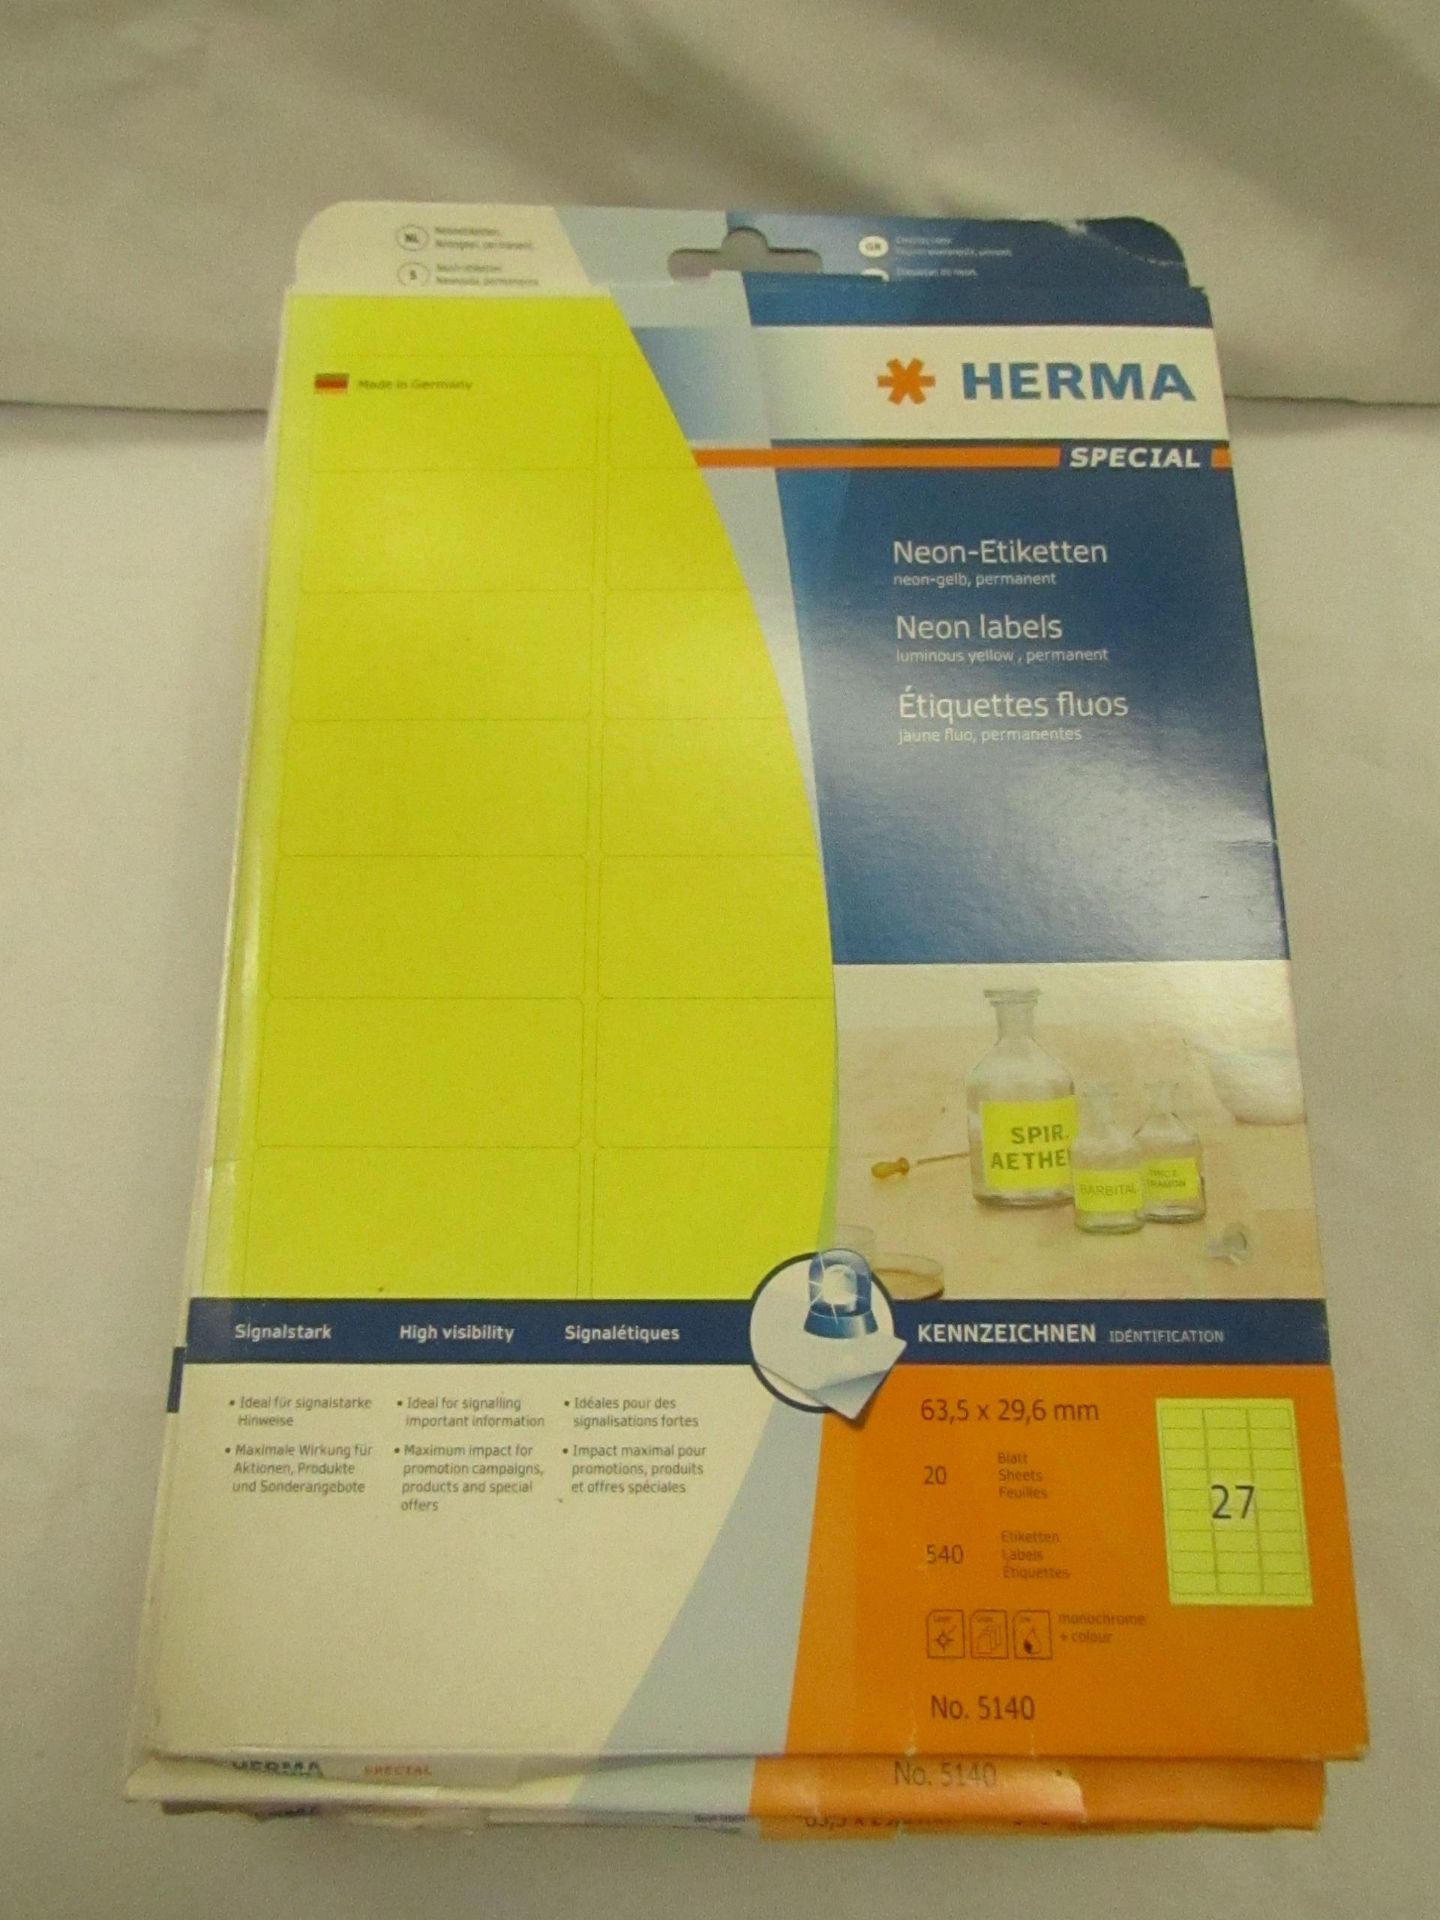 10x packs of 25 Herma Sticker sheets, Each sheet has 12 labels, all unchecked and the colour may